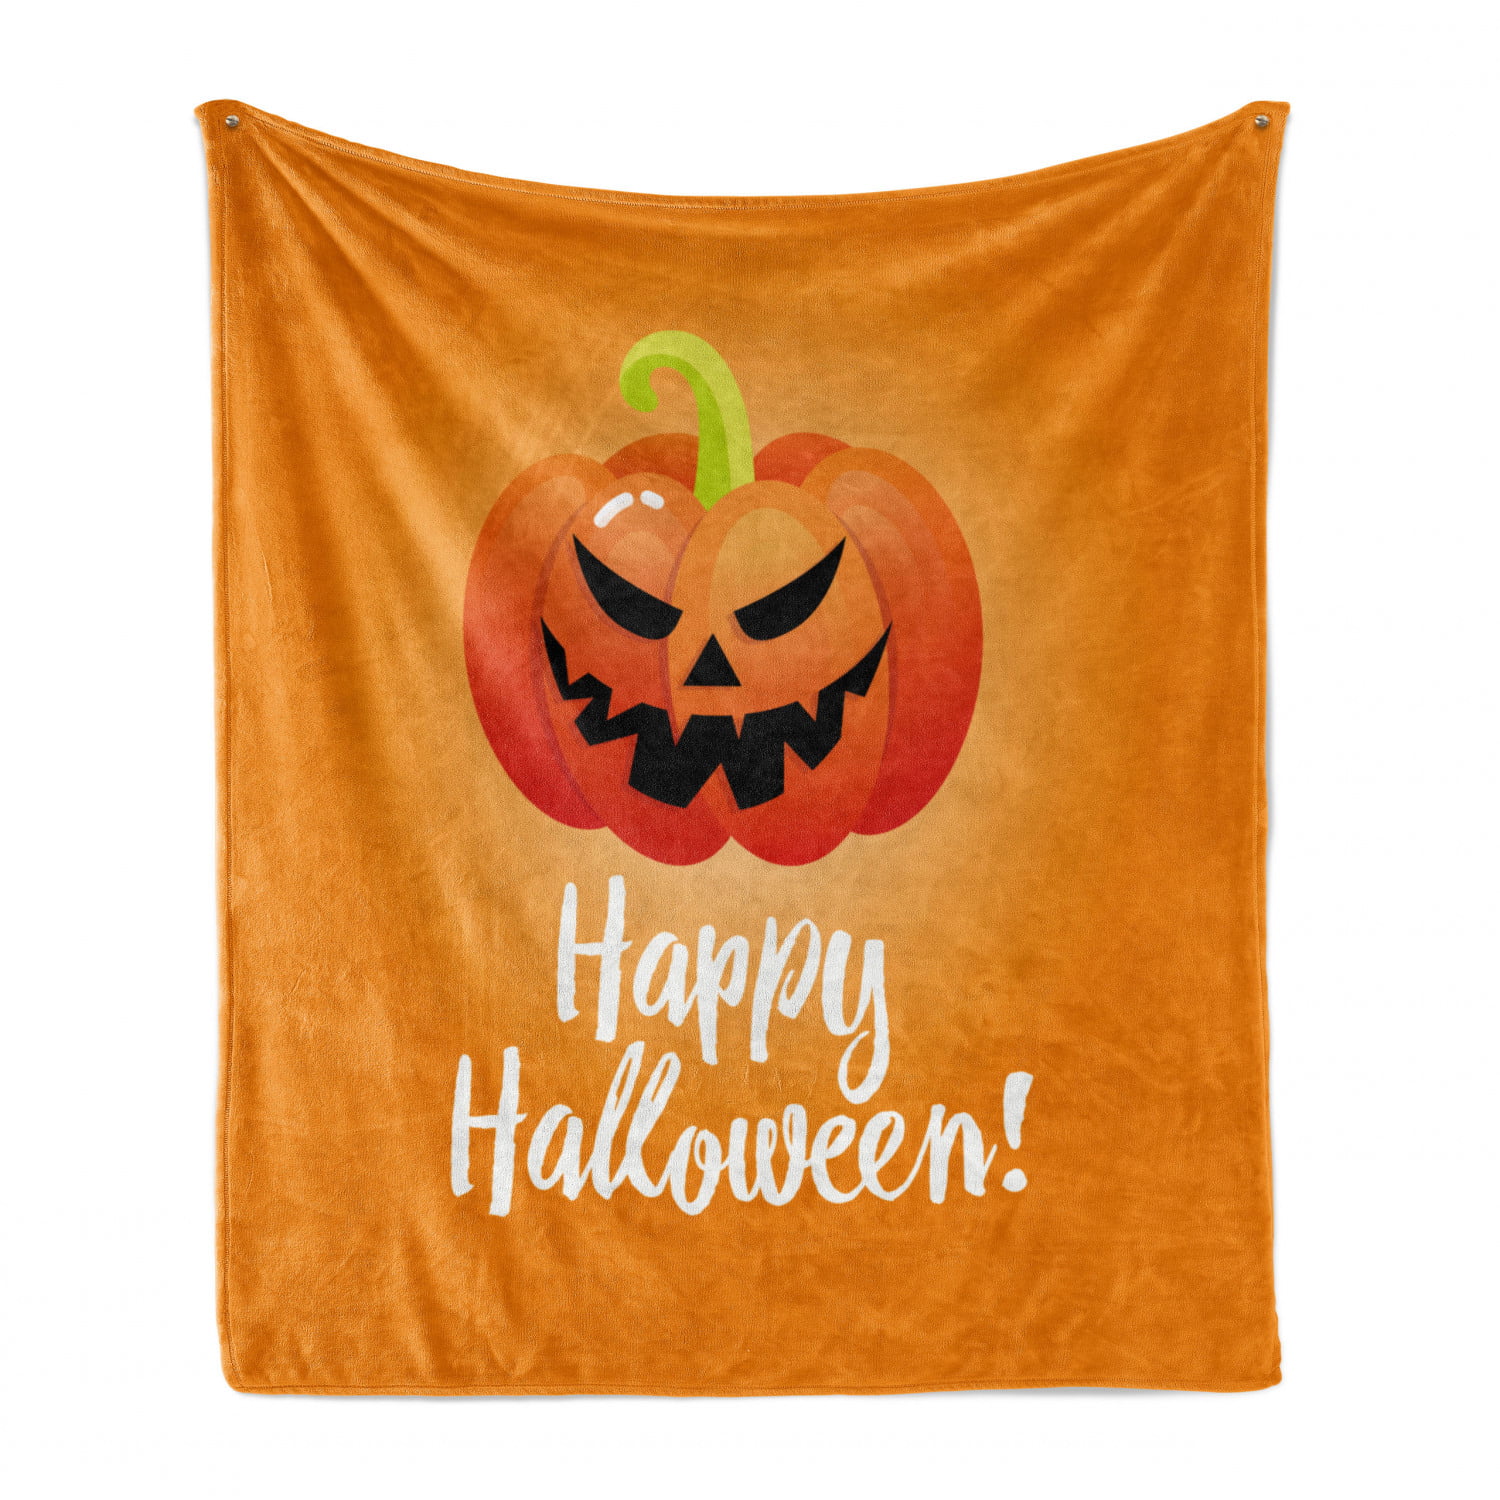 Trick Or Treat Pumpkin Blanket Warm Throw Blanket Super Soft Cozy Fleece Throw Blanket All Season Flannel Blankets for Sofa Couch Bed Living Room 